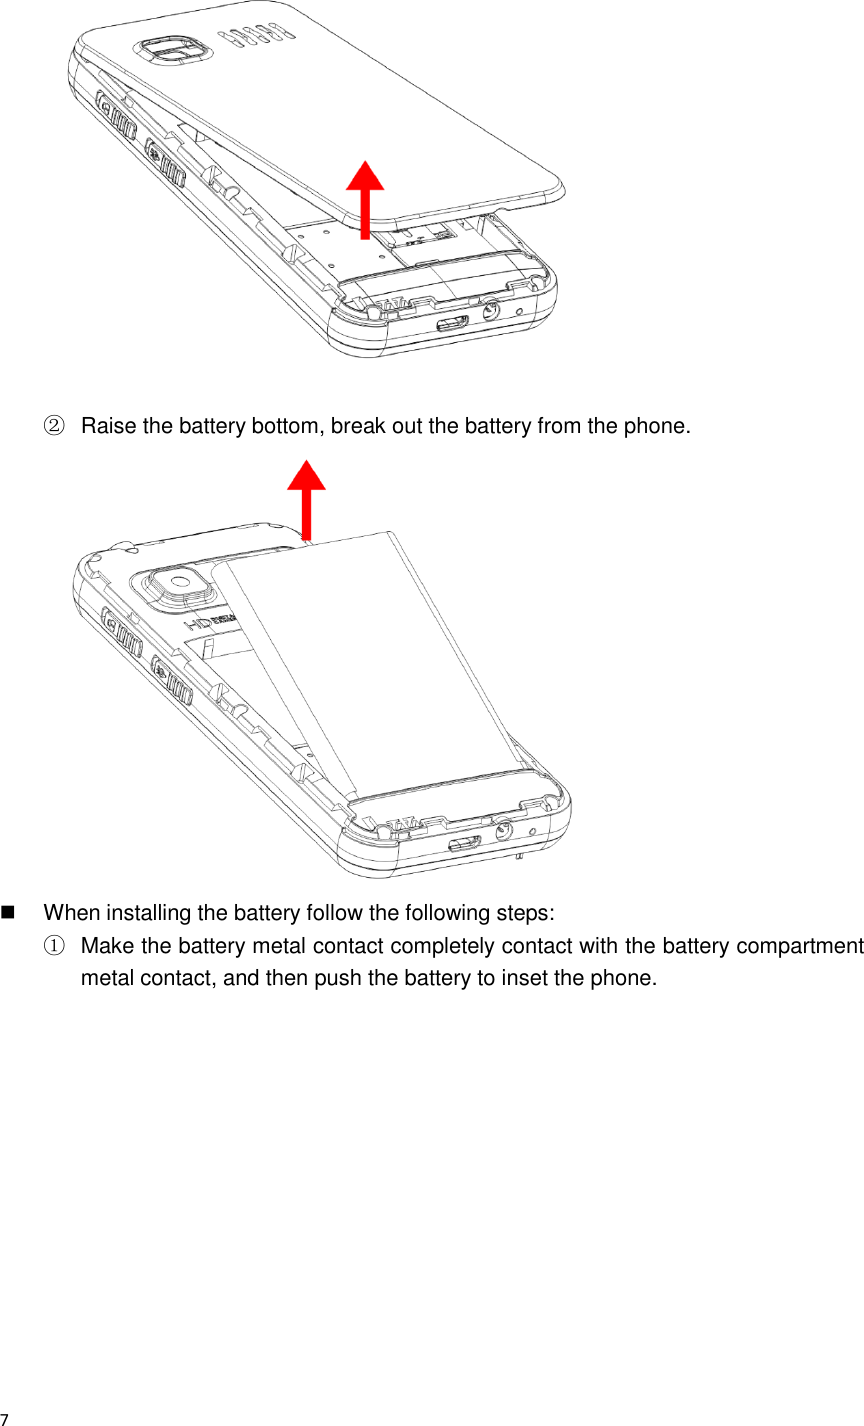  7   ②  Raise the battery bottom, break out the battery from the phone.    When installing the battery follow the following steps: ①  Make the battery metal contact completely contact with the battery compartment metal contact, and then push the battery to inset the phone. 